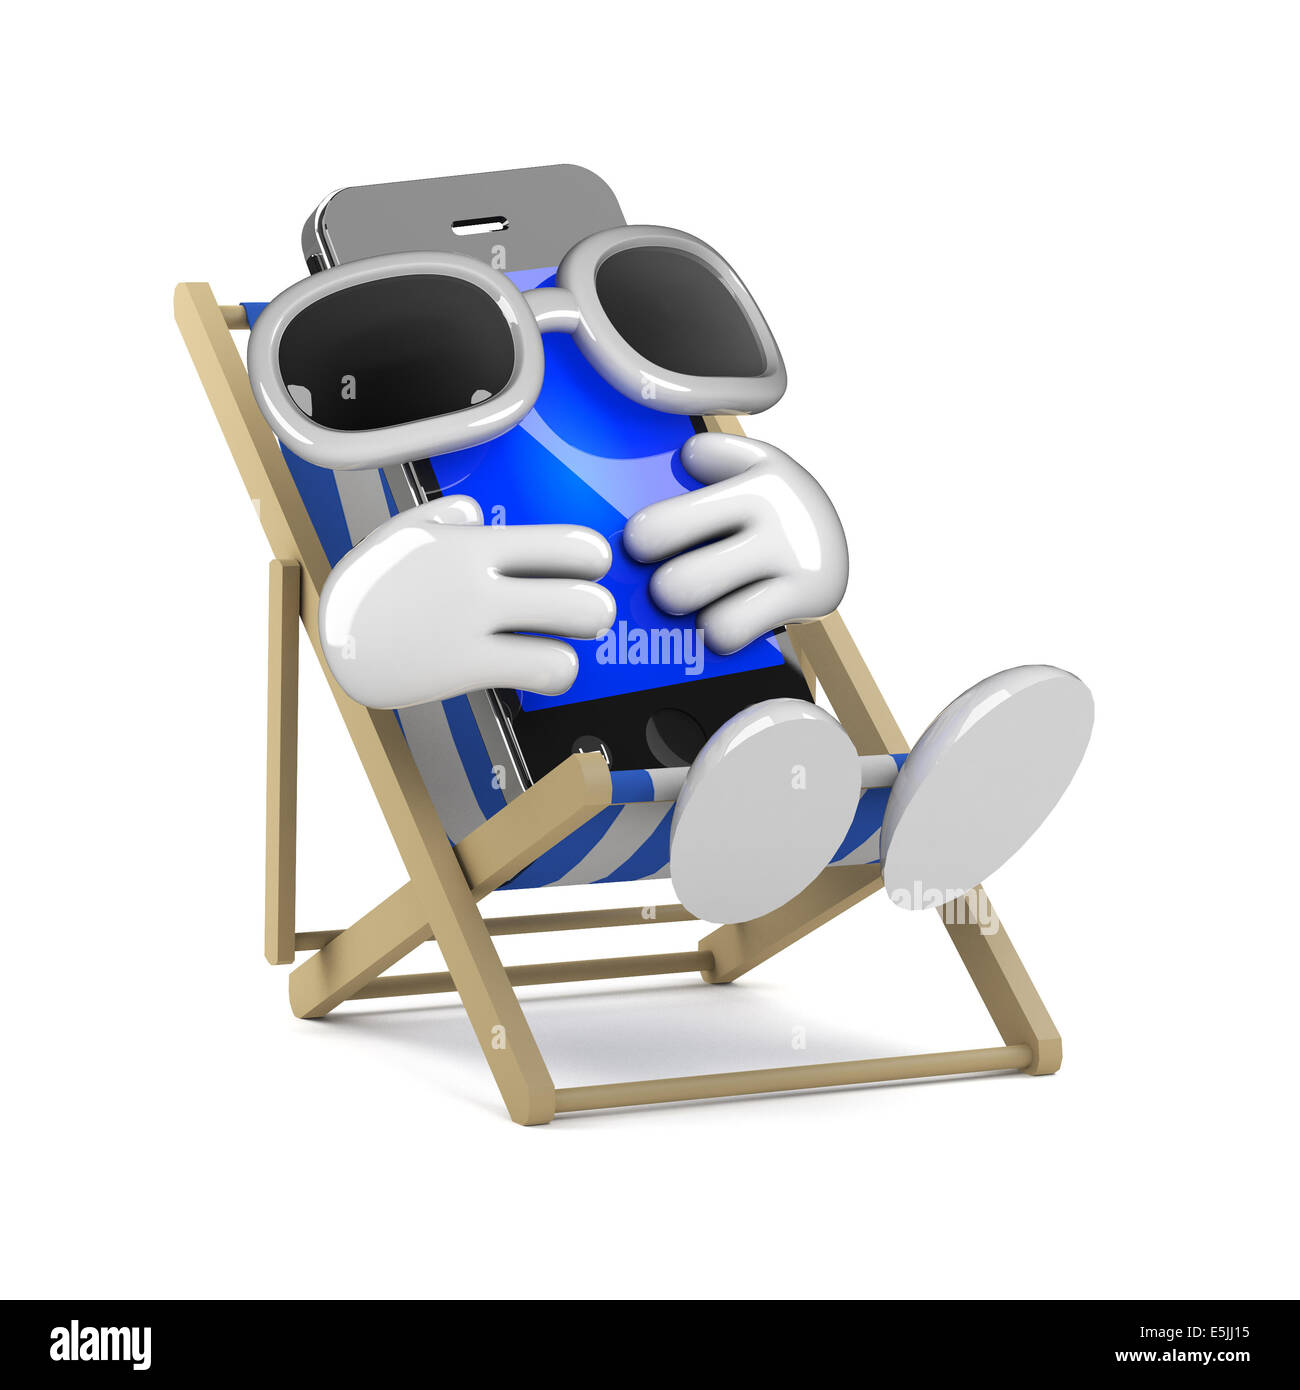 3d render of a smartphone character basking in the sun on a deckchair Stock Photo